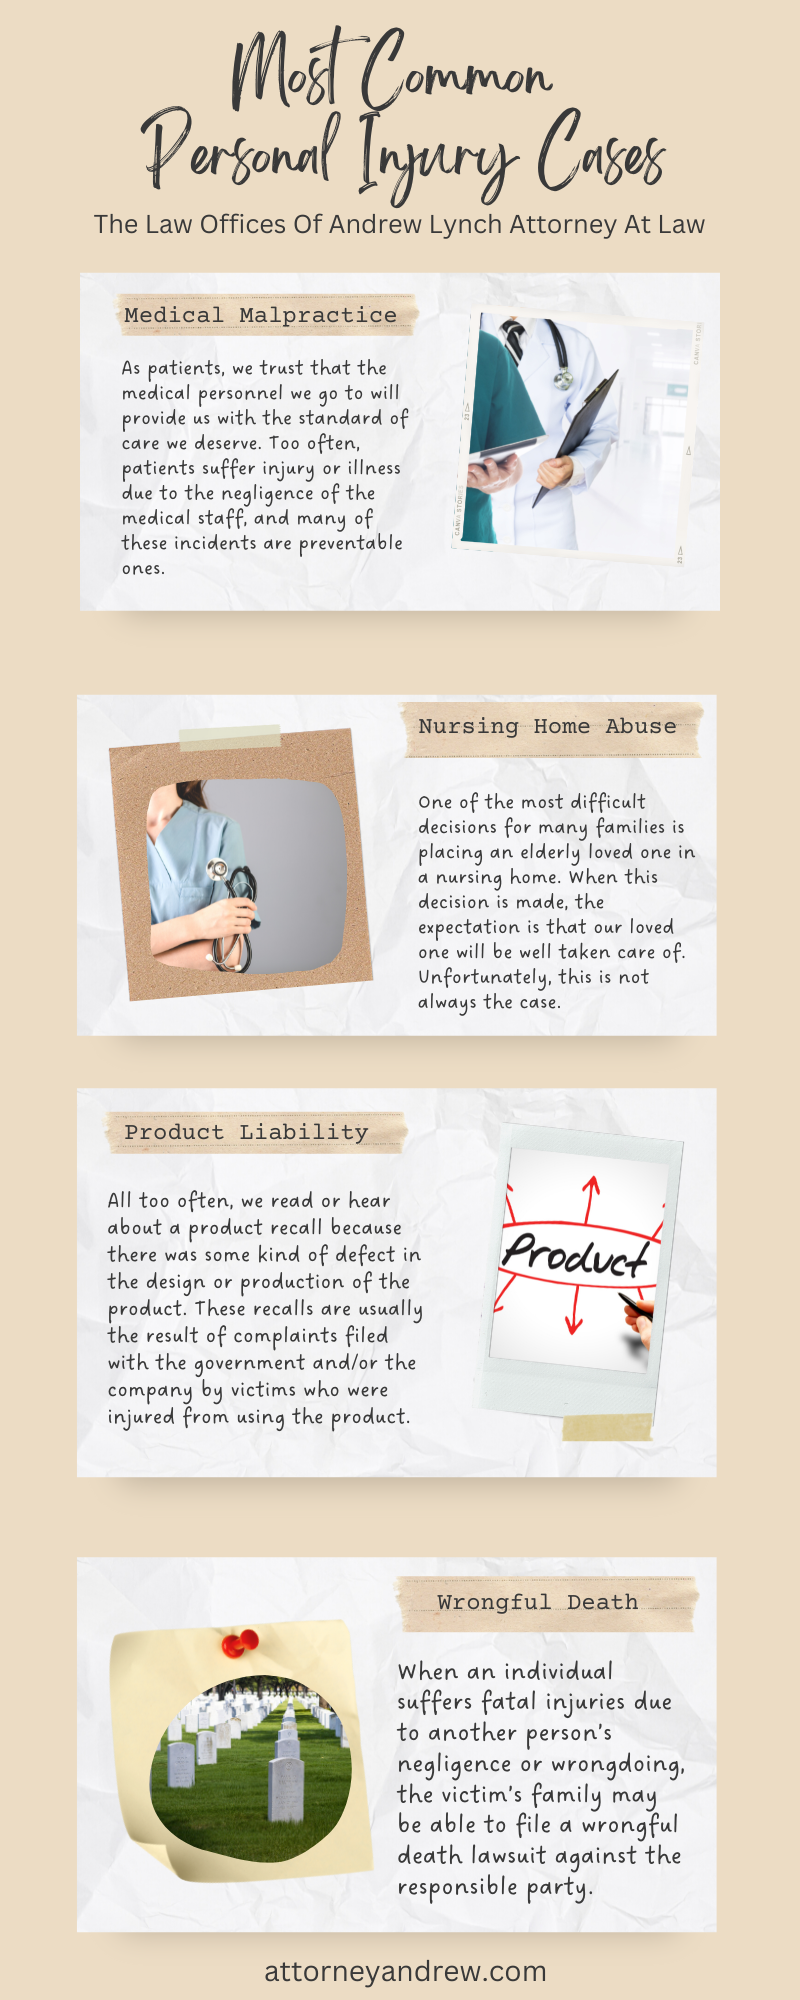 Most Common Personal Injury Cases Infographic